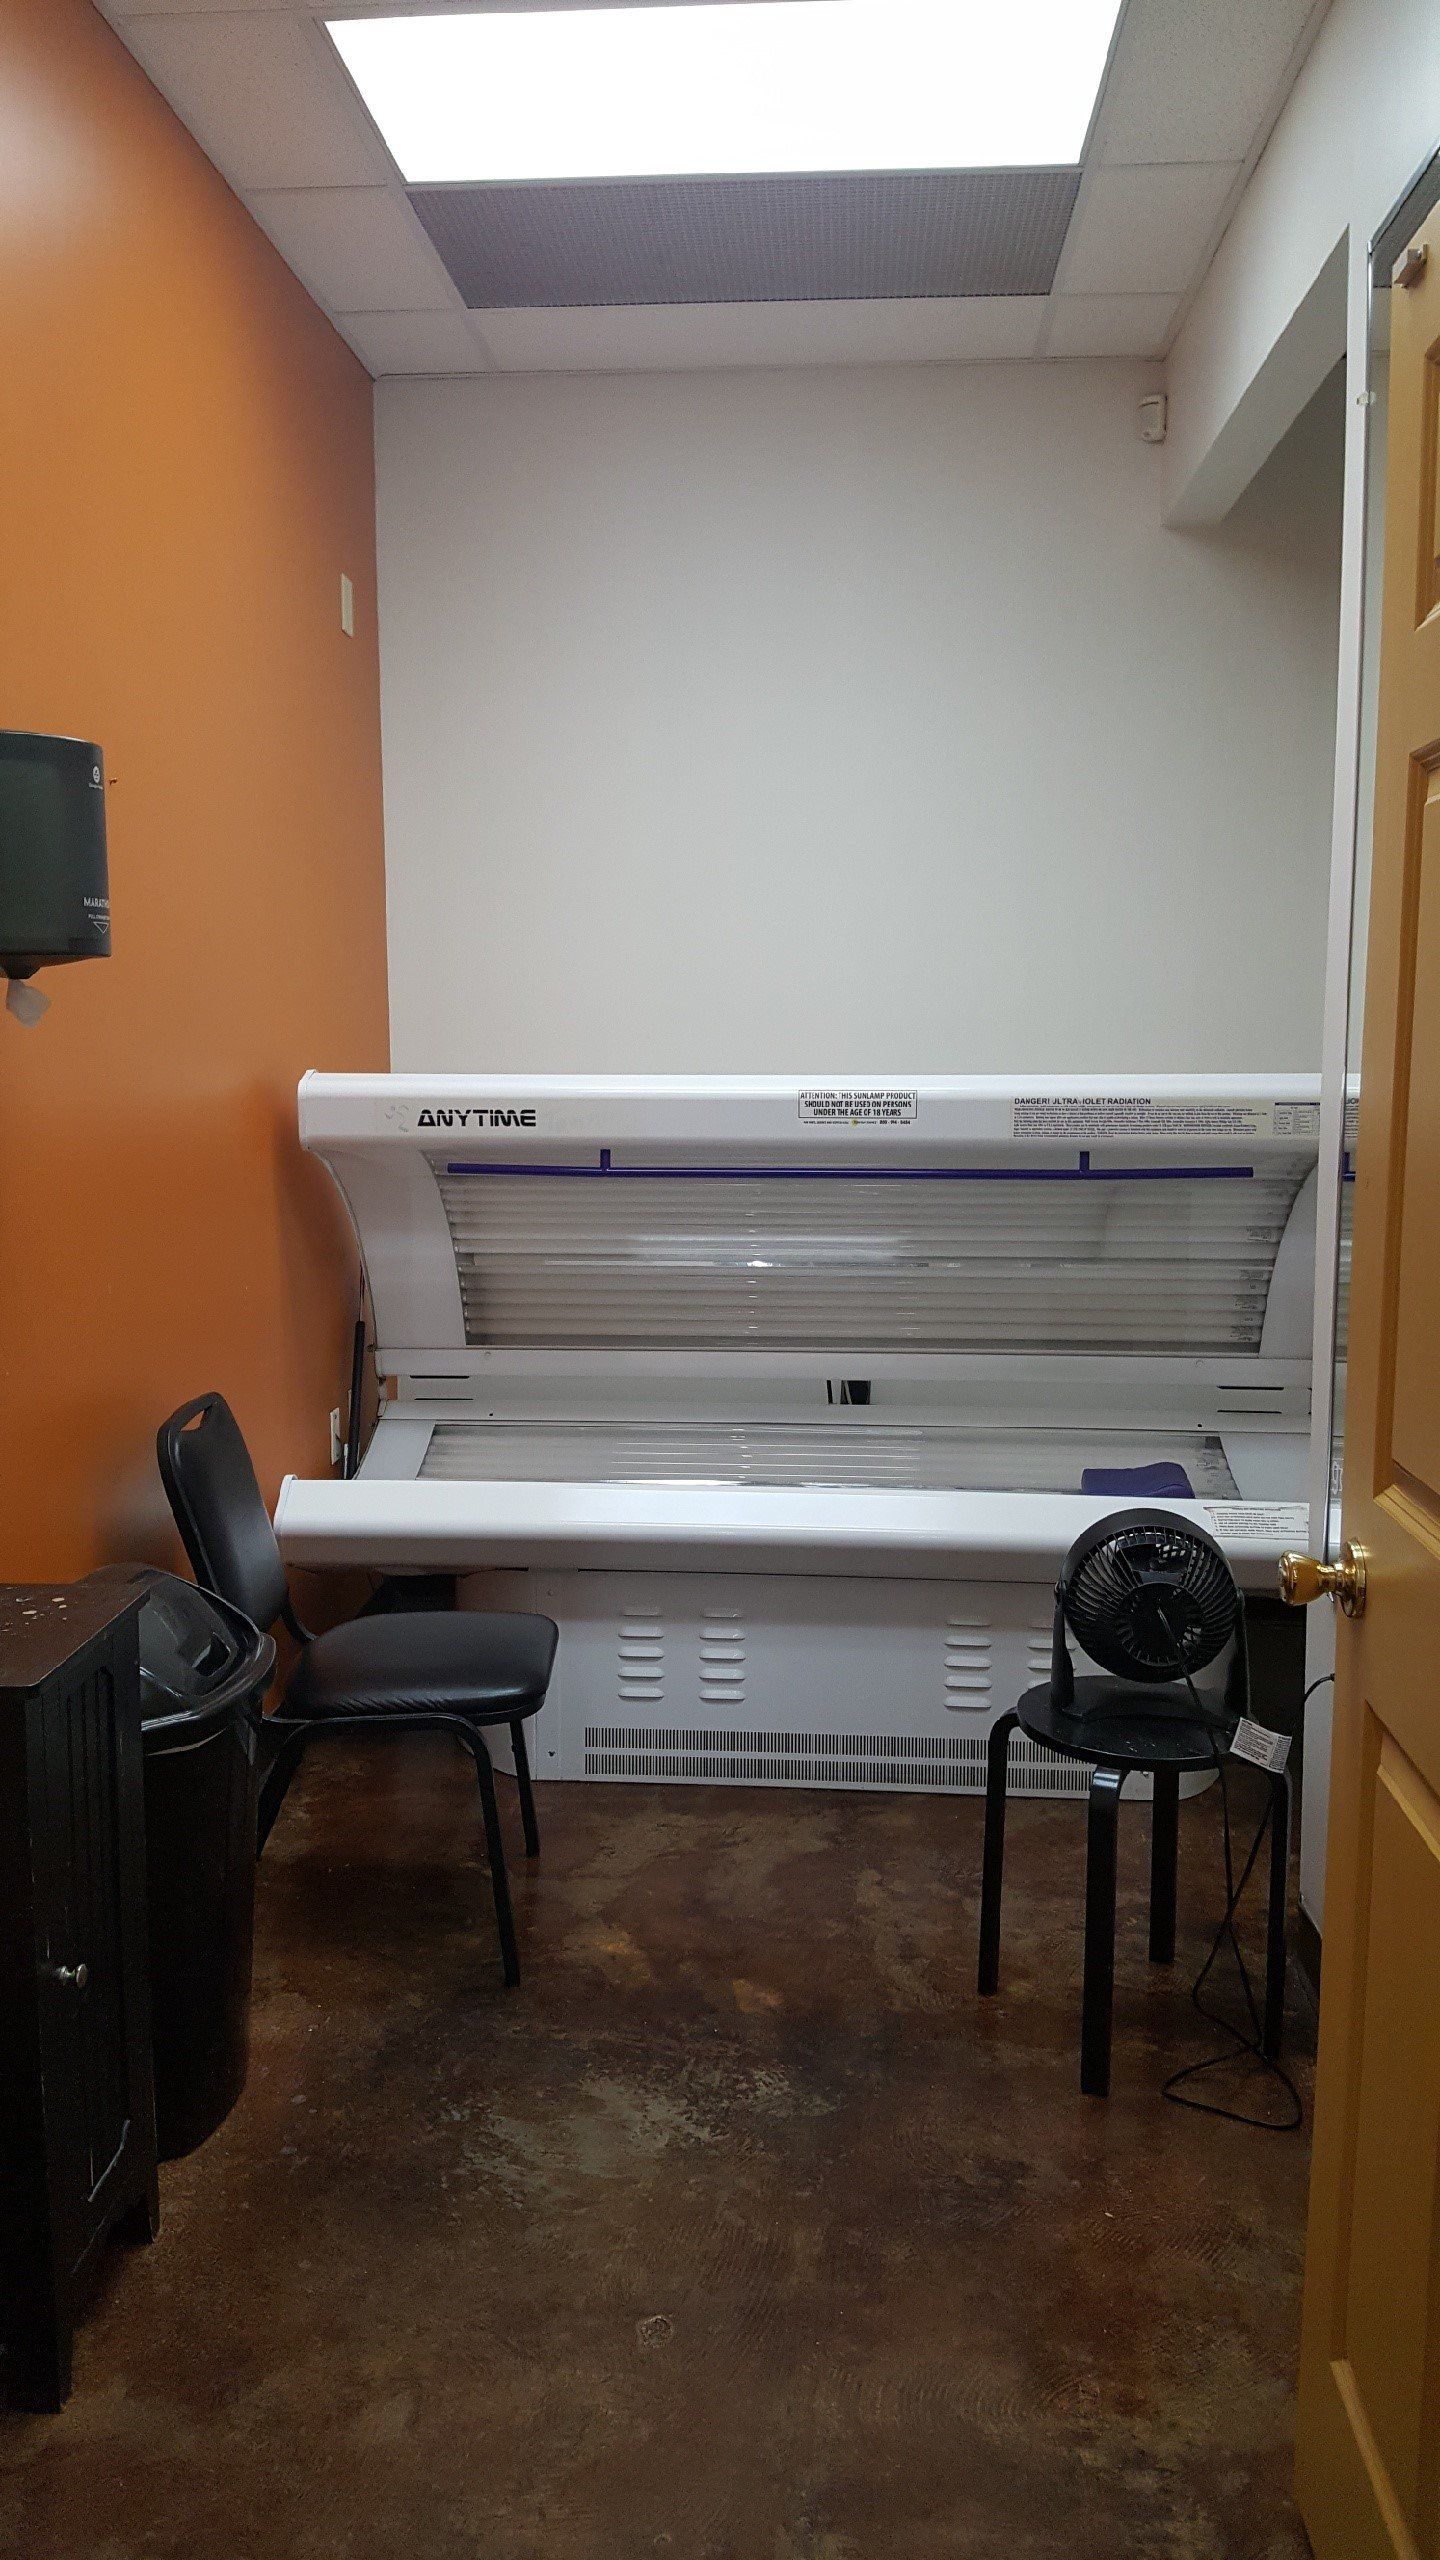 Tanning Bed Near Me - Anytime Fitness Lexington KY - Tanning Salon